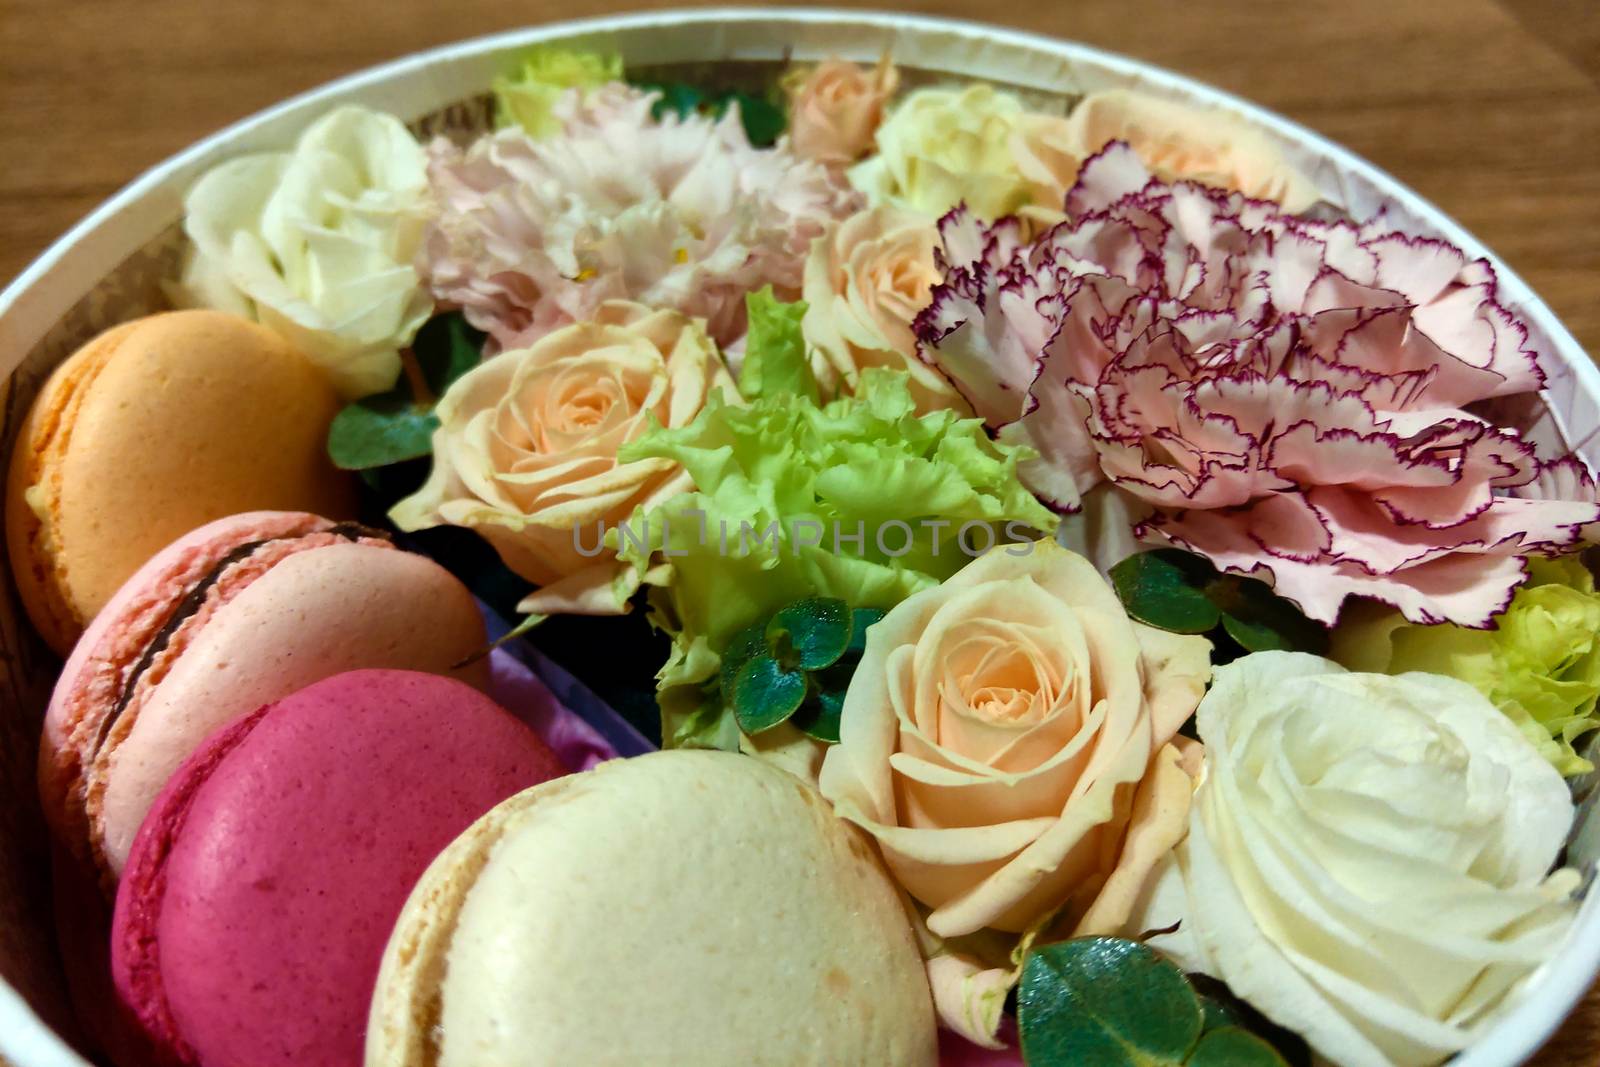 Colorful macaroons and flowers. Sweet macarons in gift box. Top view